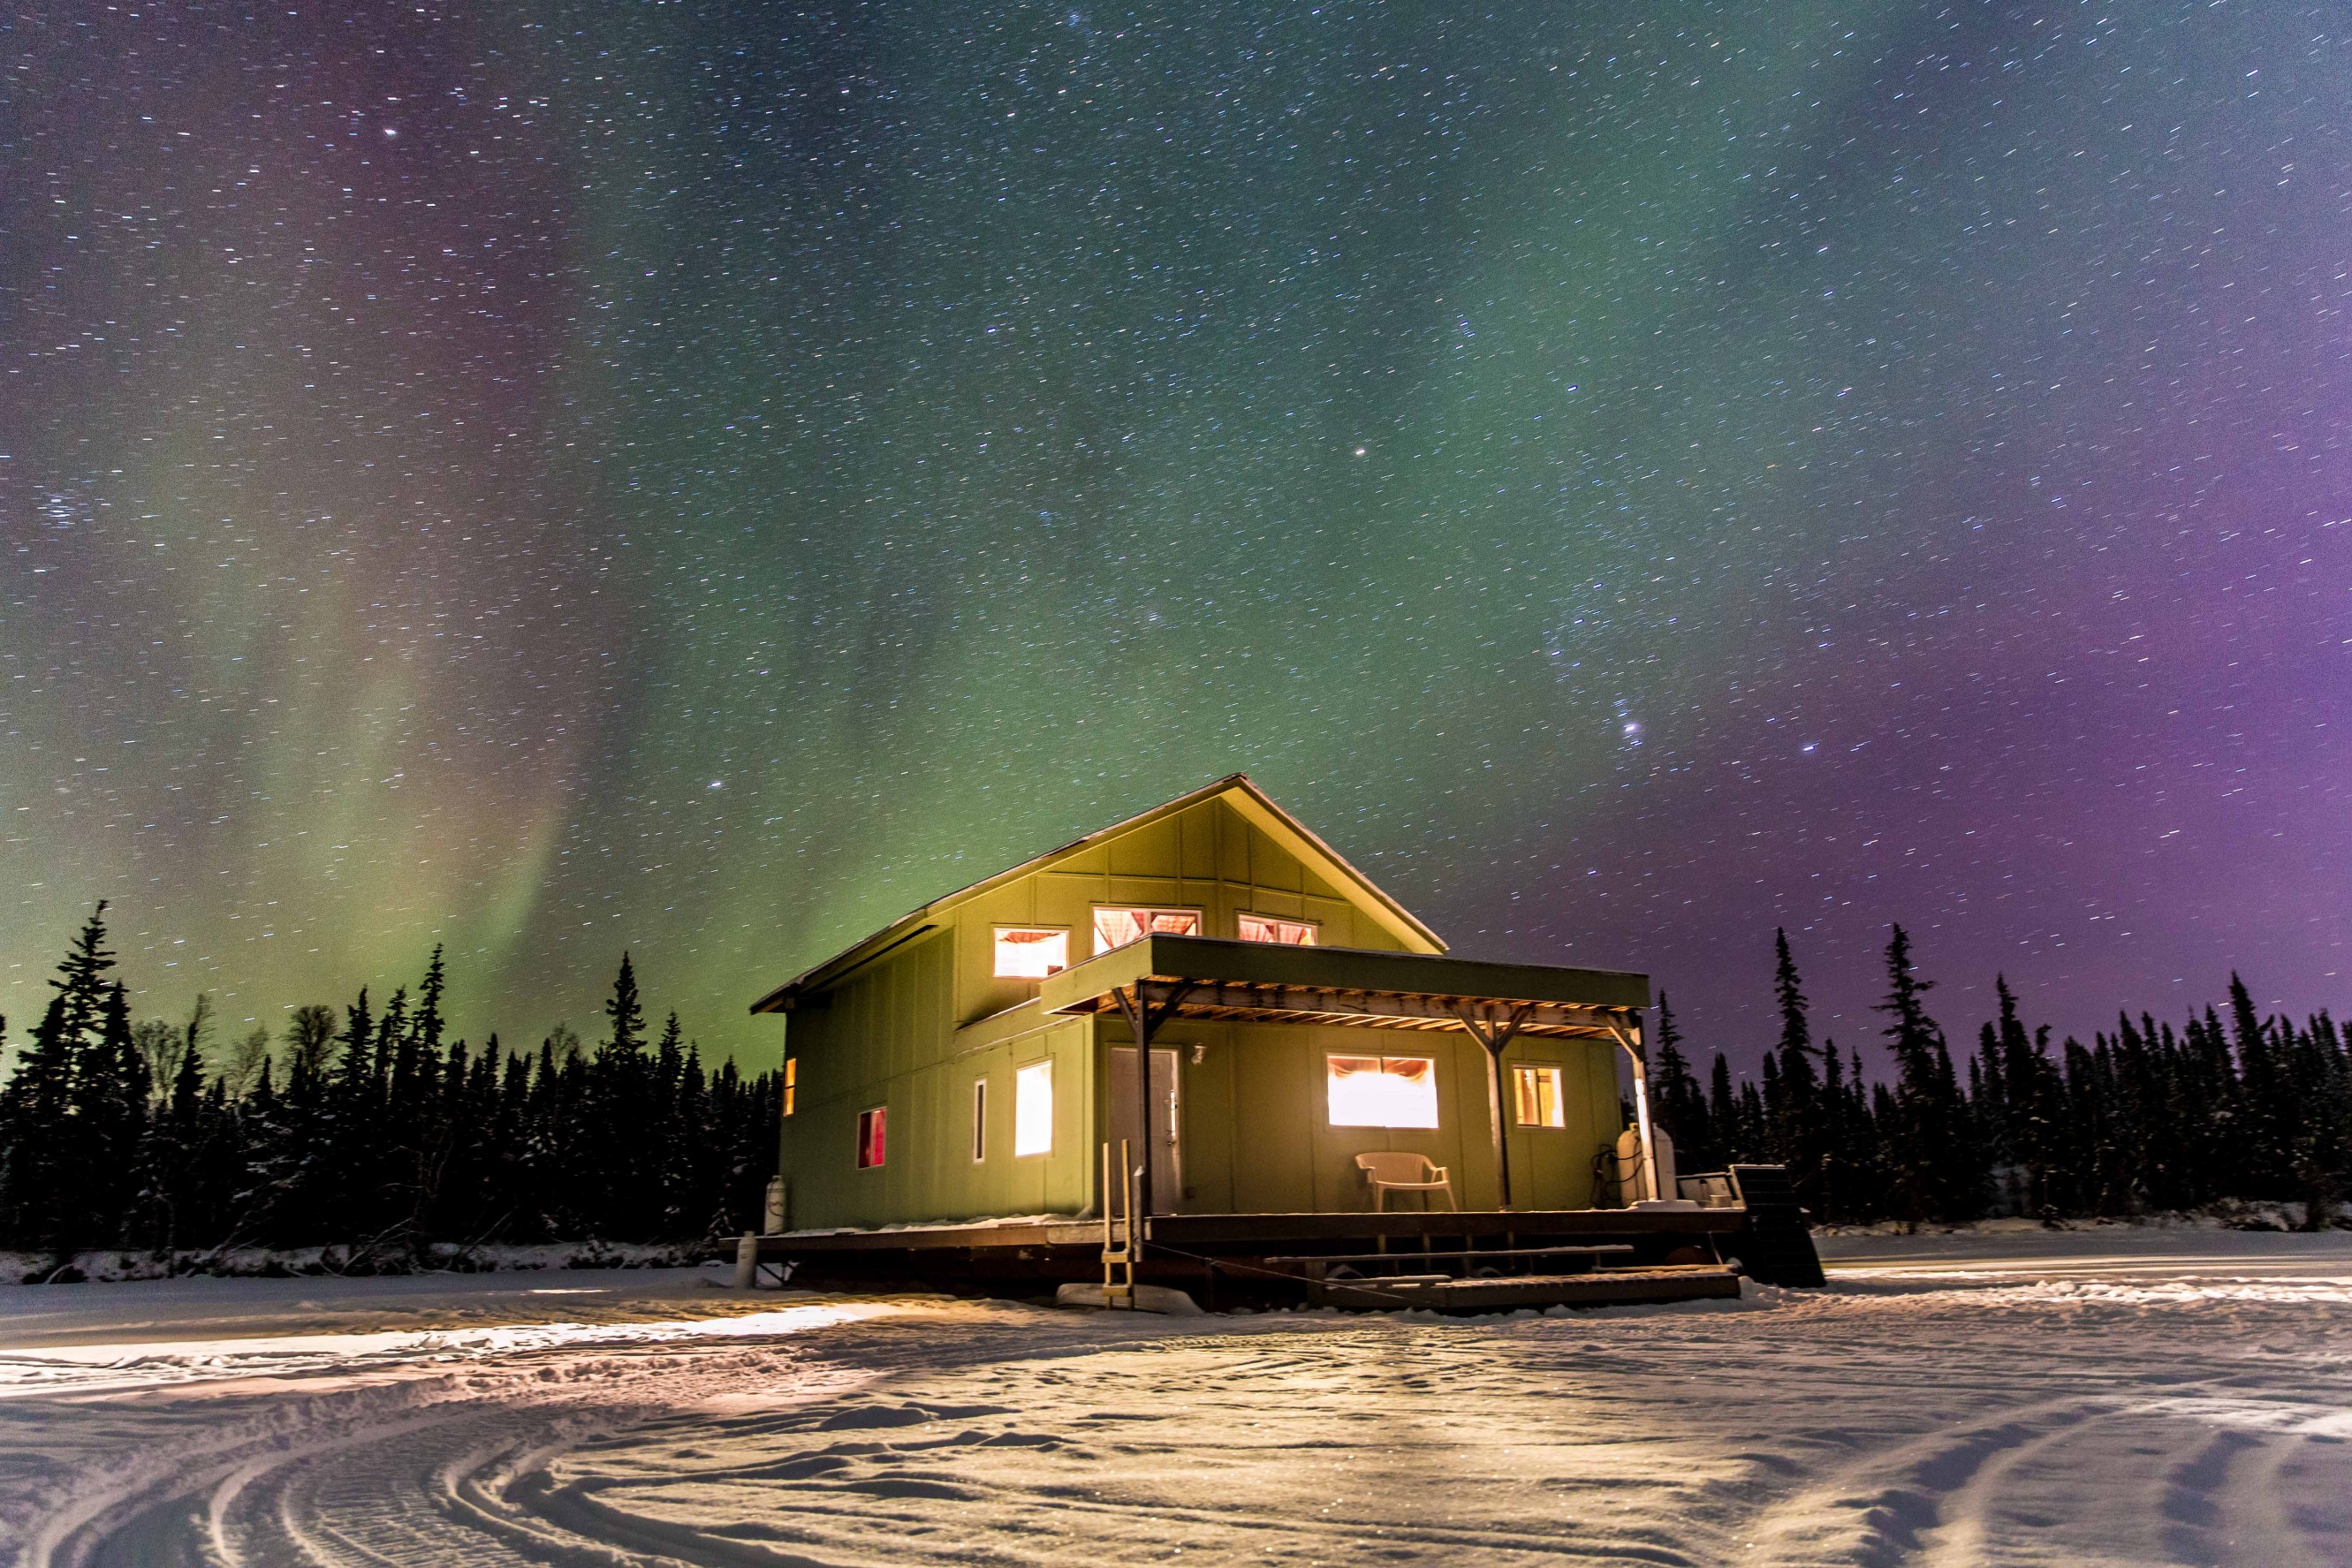 The northern lights dazzle the sky behind a green cabin sitting on in a flat, snowy field. 